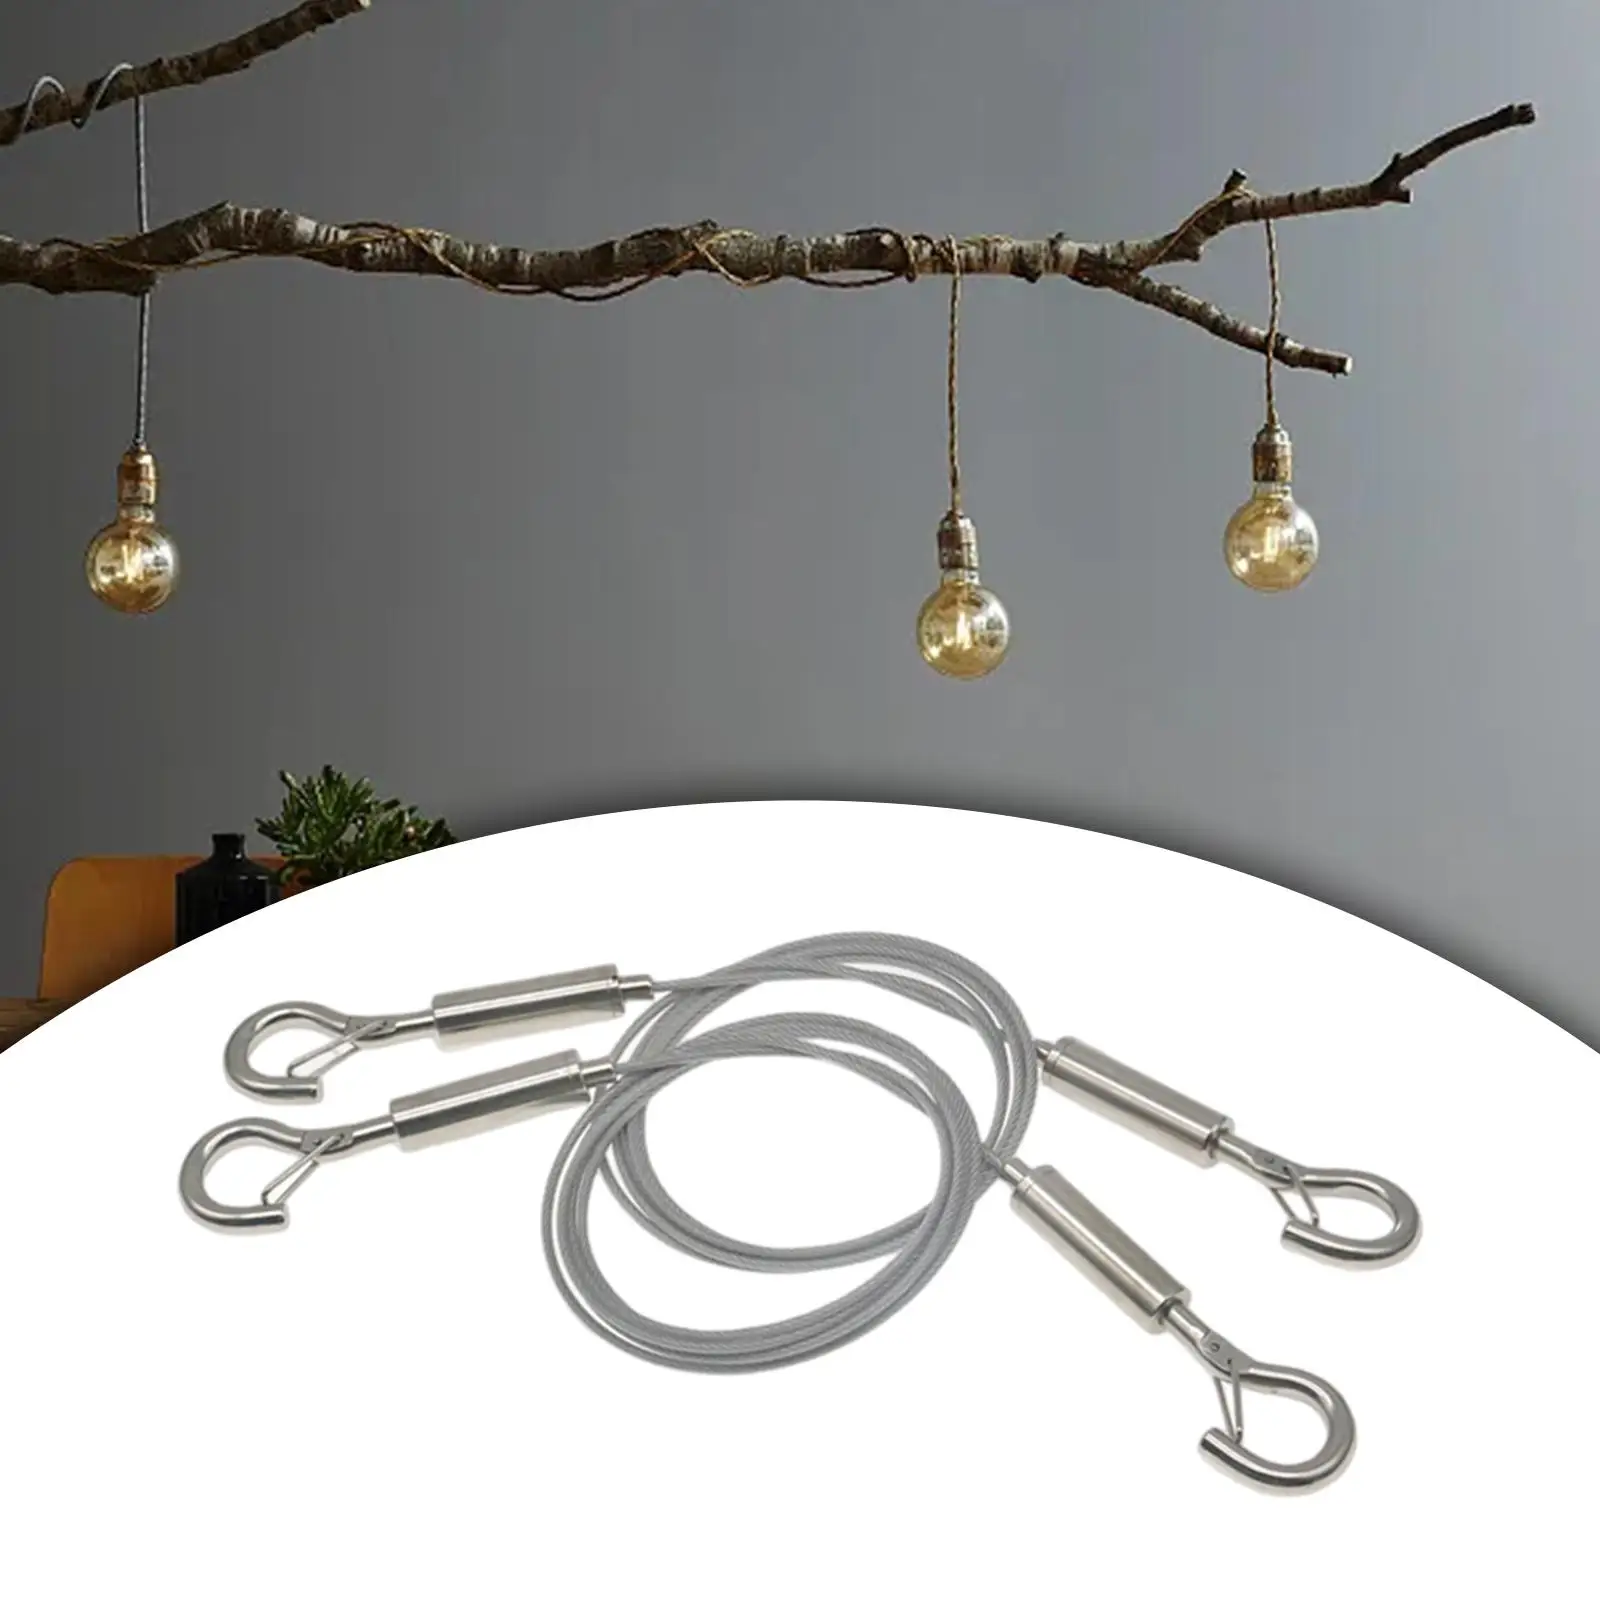 Heavy Duty Mirror Hanging Wire Suspension Kit Versatile Good Load Bearing Accessory Adjustable 6.56 Feet Long for Indoor Outdoor